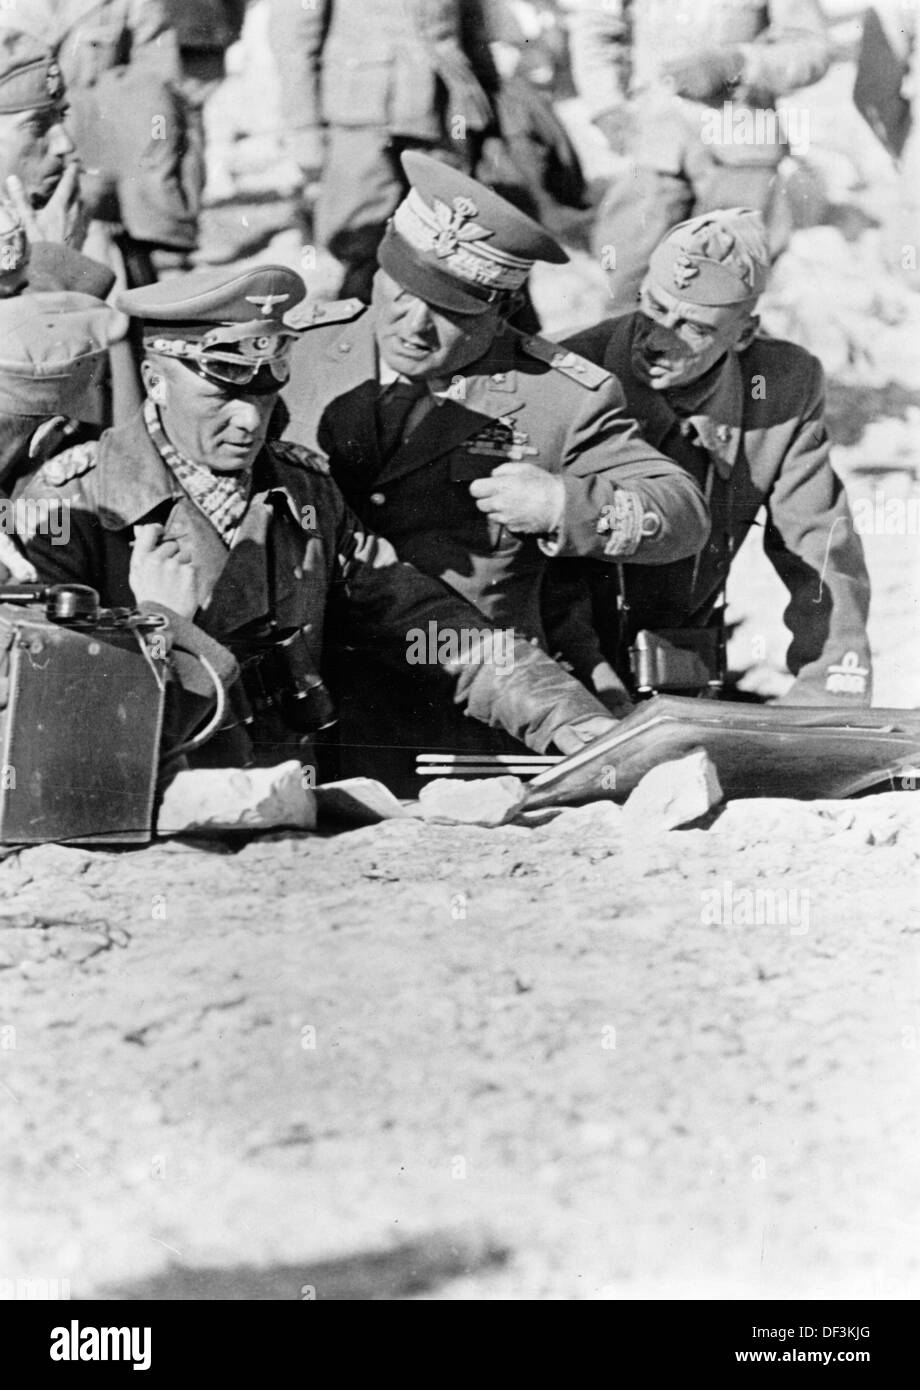 Field Marshal Erwin Rommel (l) talks with Italian allies in the field during the occupation of Tobruk in July 1942. The Nazi Propaganda! on the back of the image is dated 4 July 1942: 'Field Marshal Rommel during strategic planning in the desert in North Africa. Field Marshal Rommel talks to the Italian Chief of Staff Cambara (m) and General Calvi (r) about the employment of German and Italian troops to follow the fleeing enemy on the Egyptian border.' Fotoarchiv für Zeitgeschichte Stock Photo